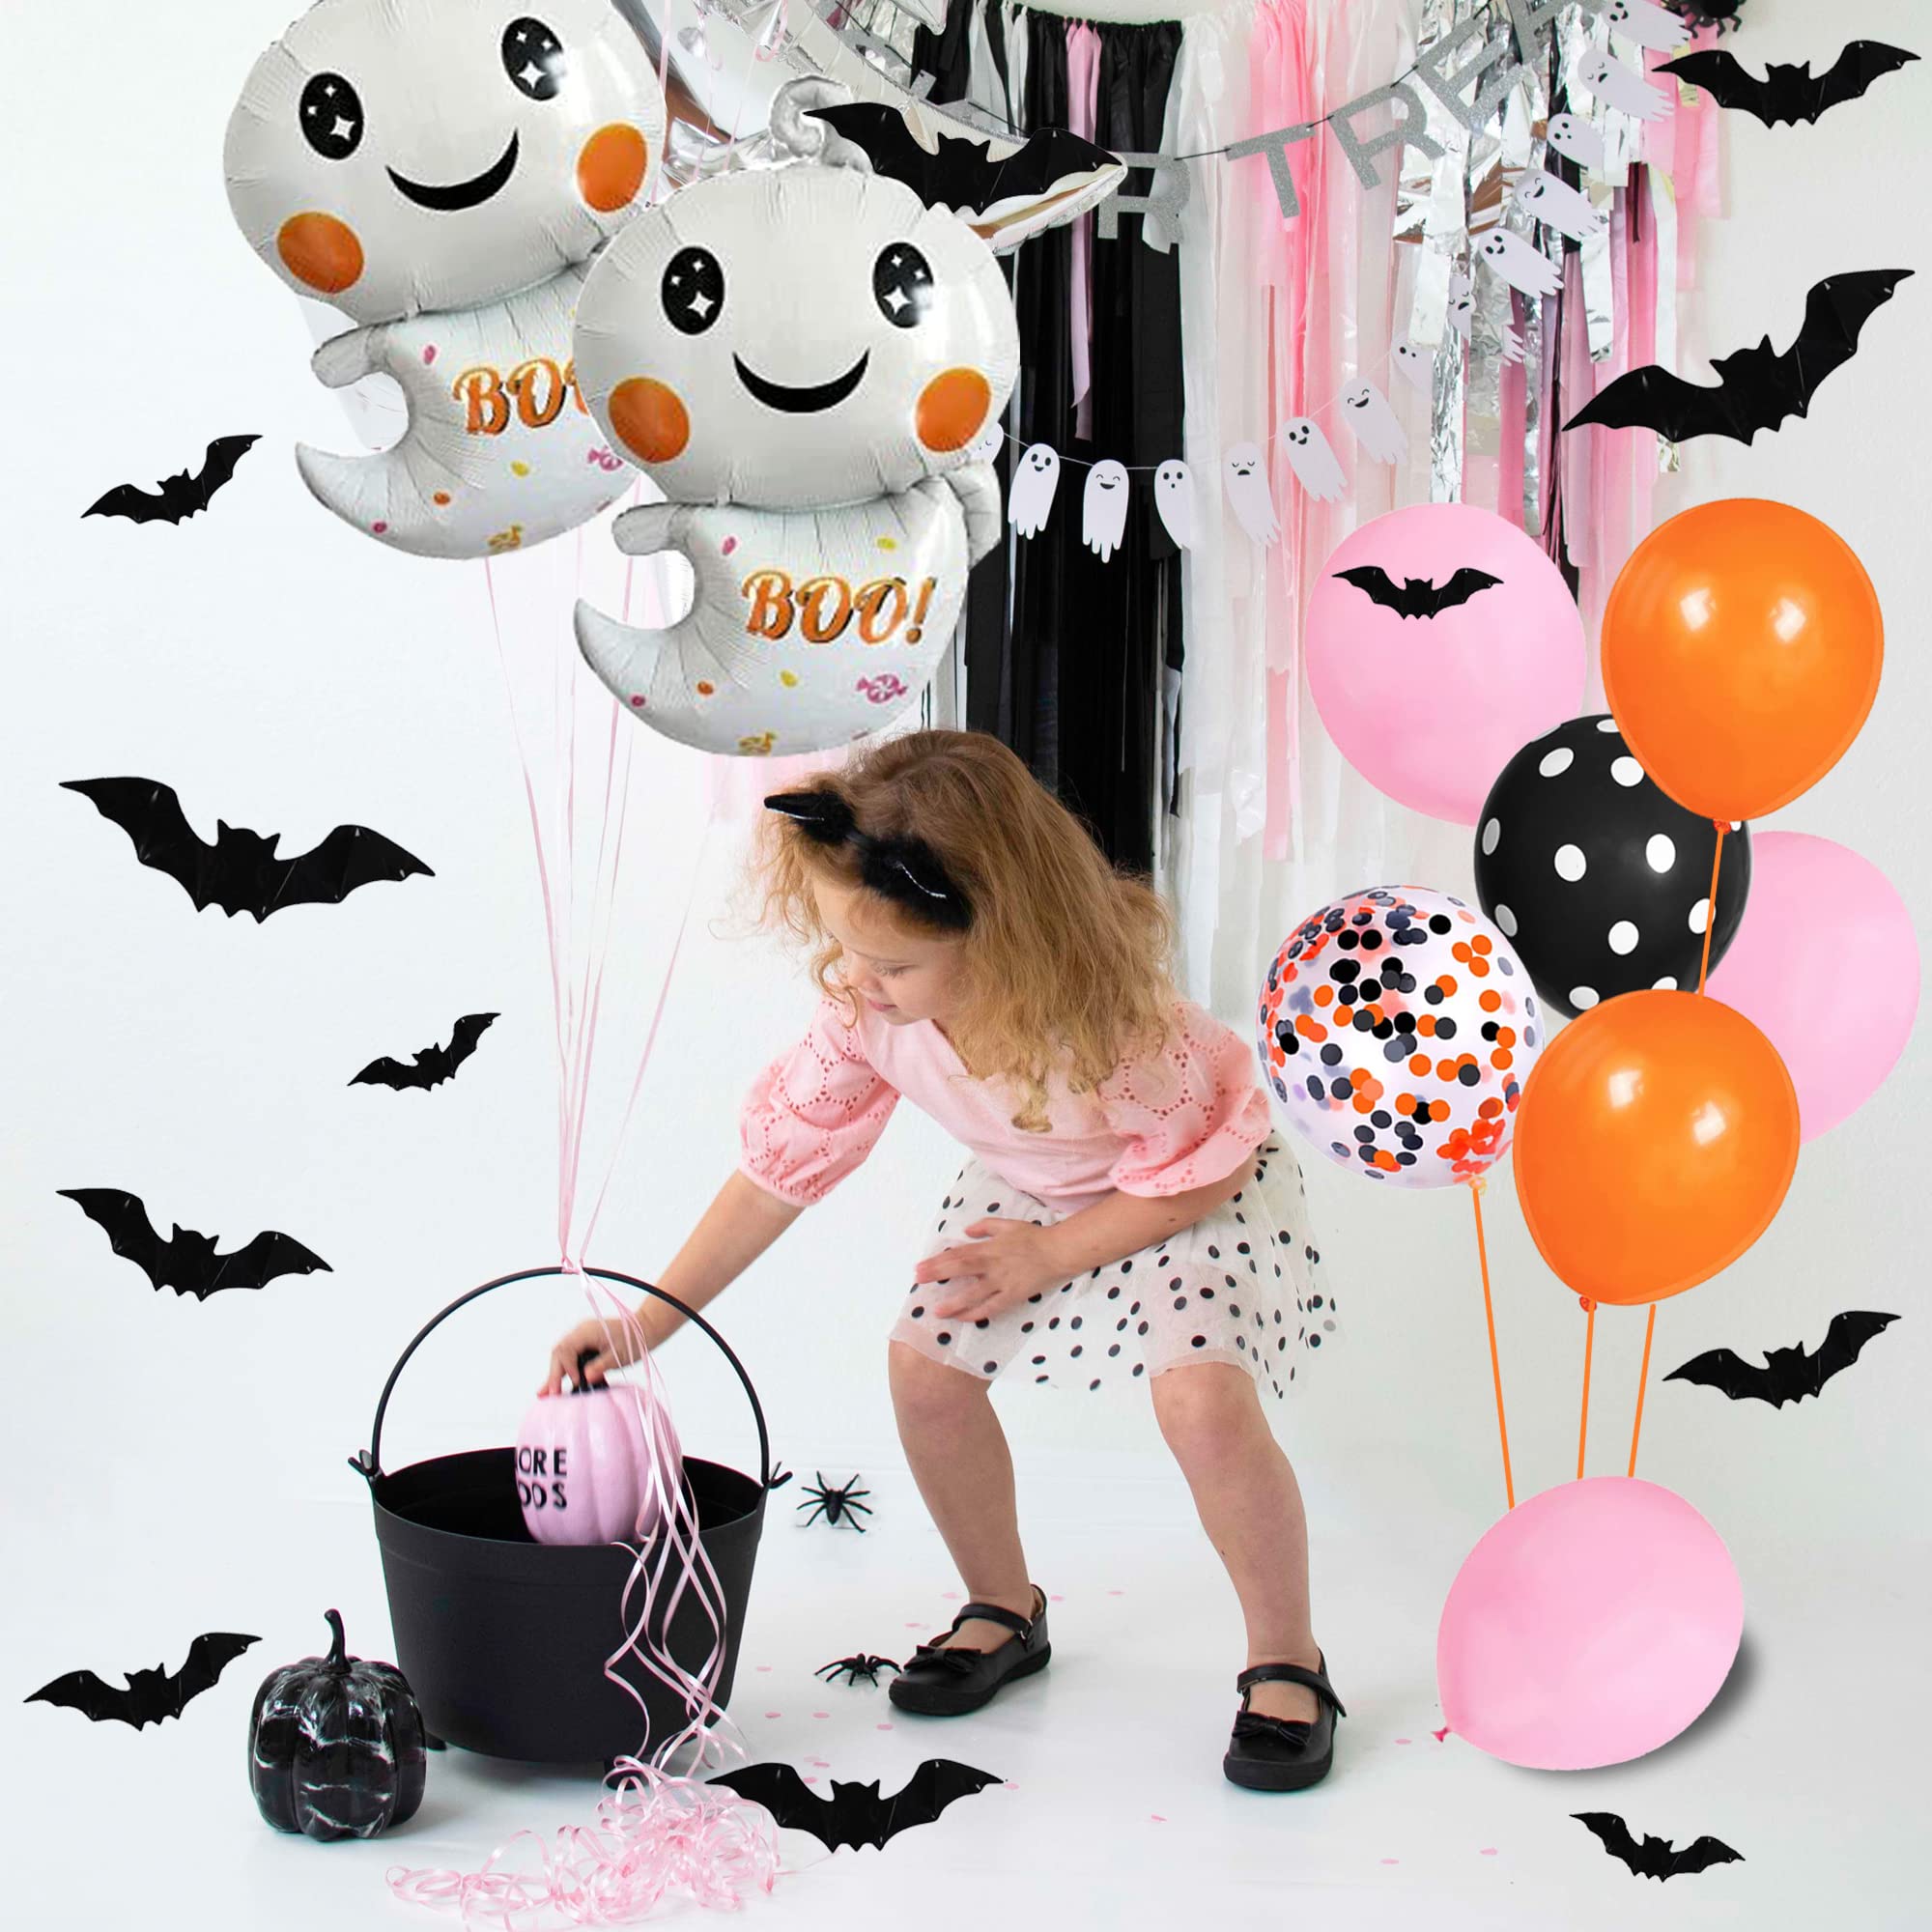 62 Pcs 12 Inch Halloween Balloons Decorations Pink Black Orange Balloons Confetti Balloons Ghost Aluminum Foil Balloons Bats Stickers for Halloween Party Birthday Supplies